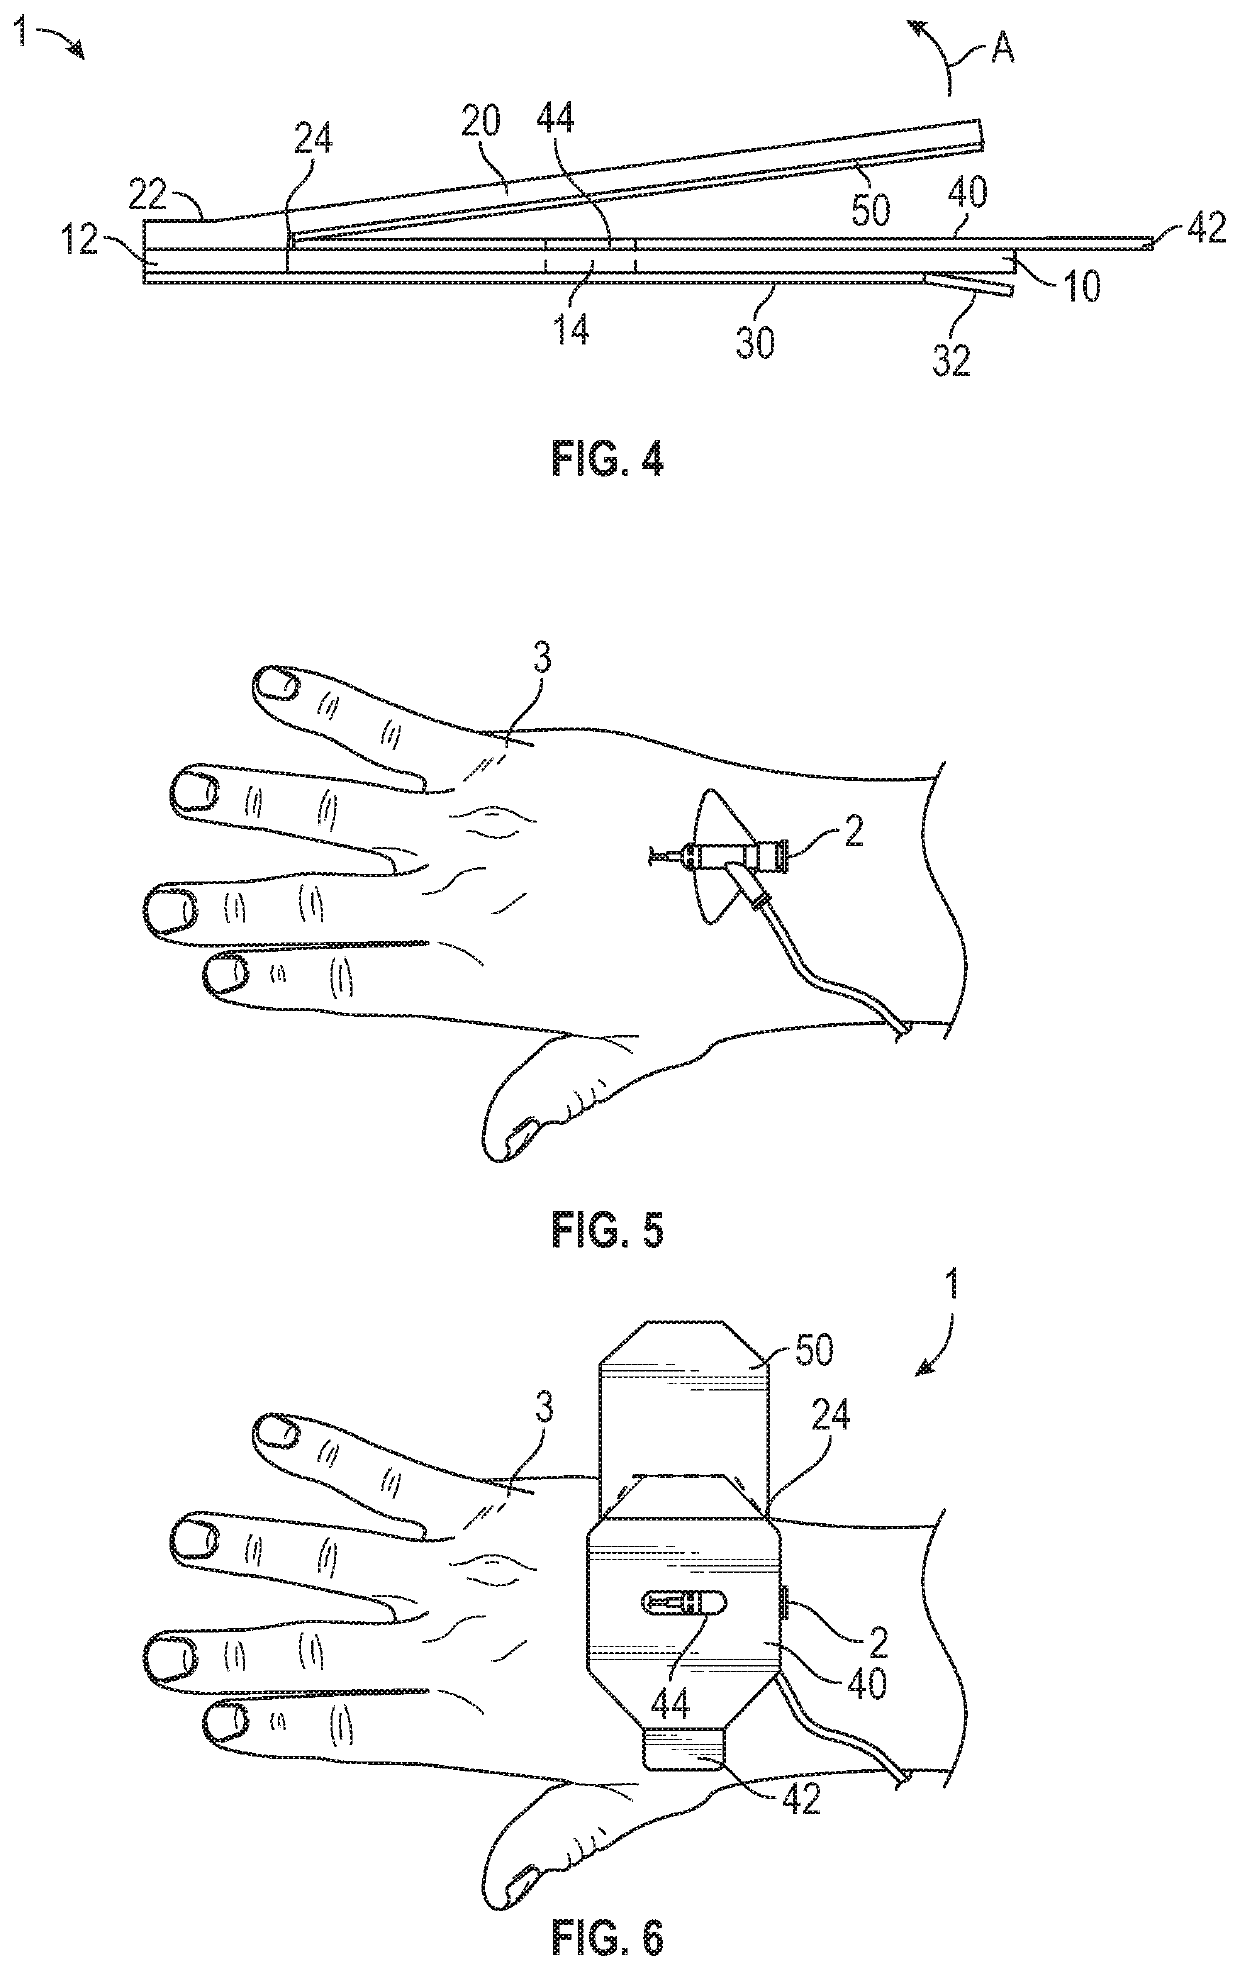 Securement dressing for vascular access device with skin adhesive application window